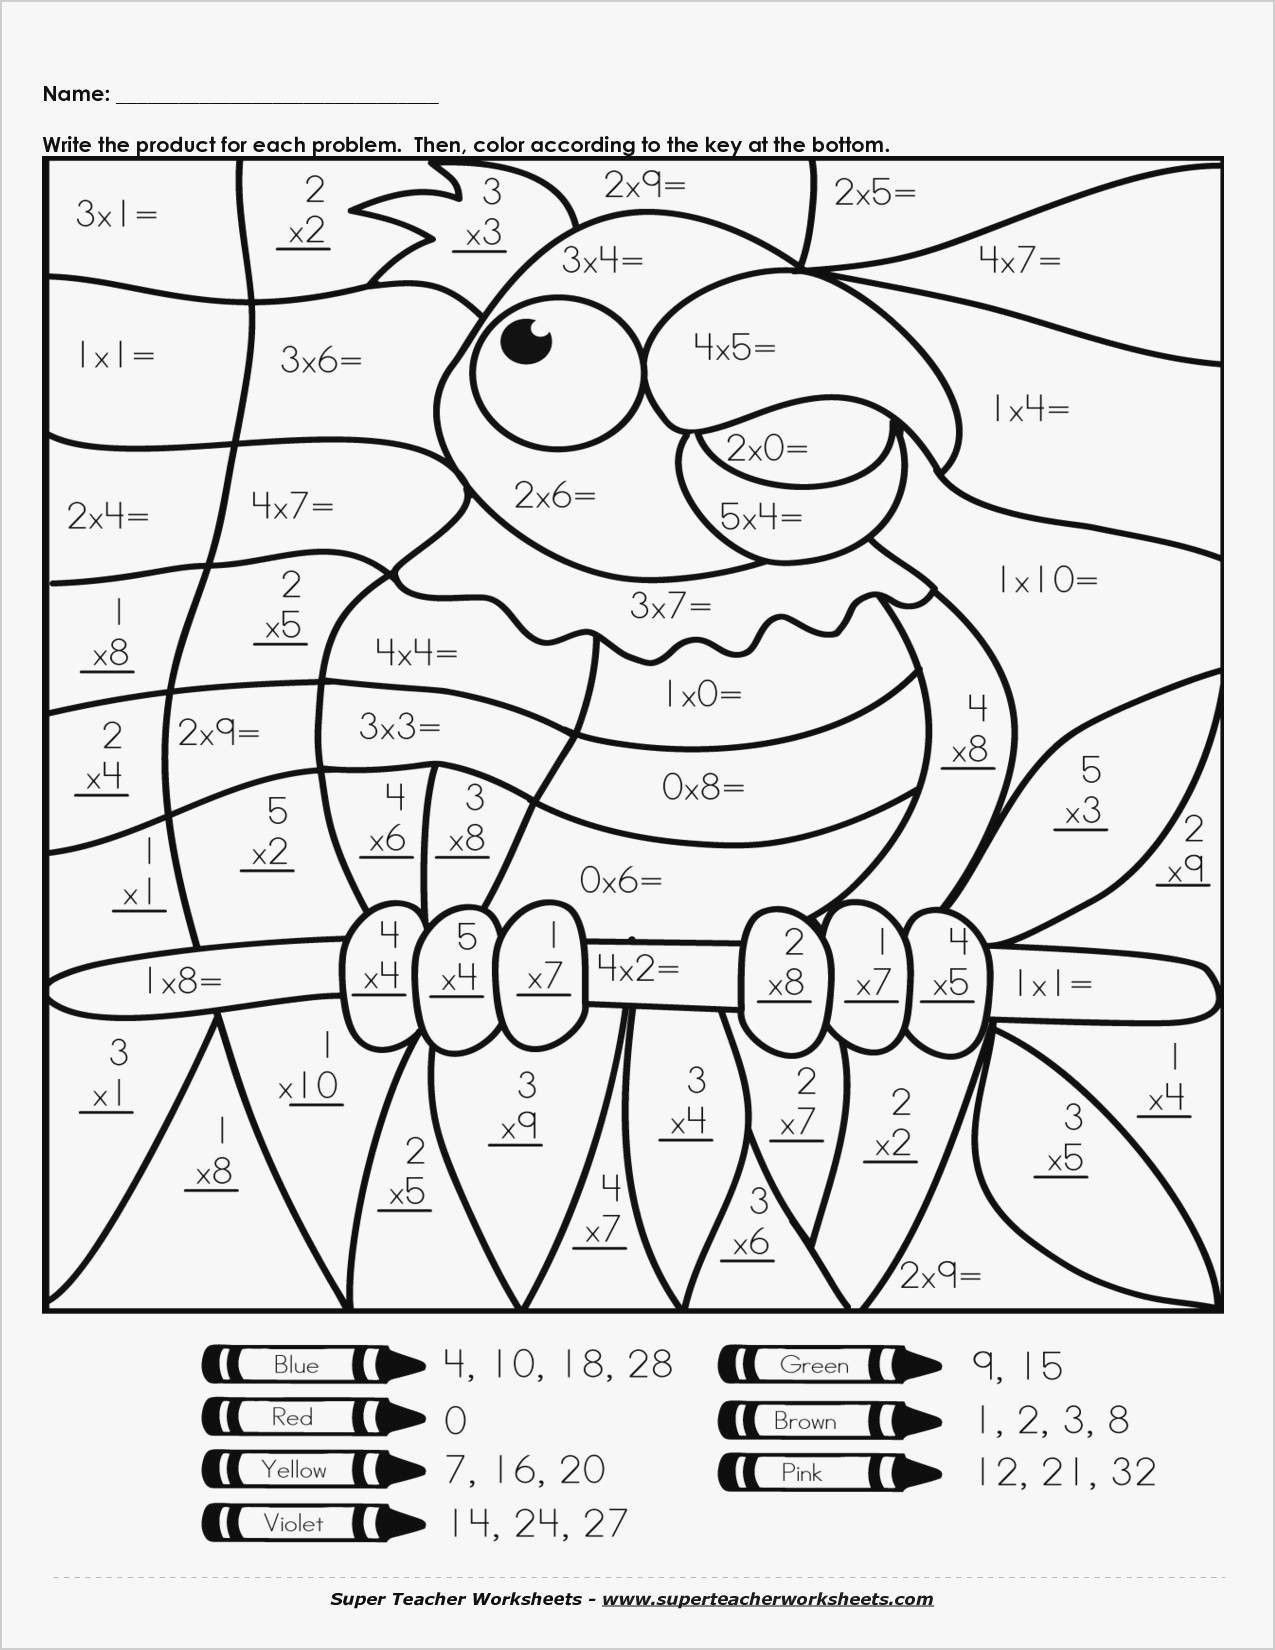 5 Free Math Worksheets Second Grade 2 Multiplication Multiply 2 Times Numbers Up To 30 AMP